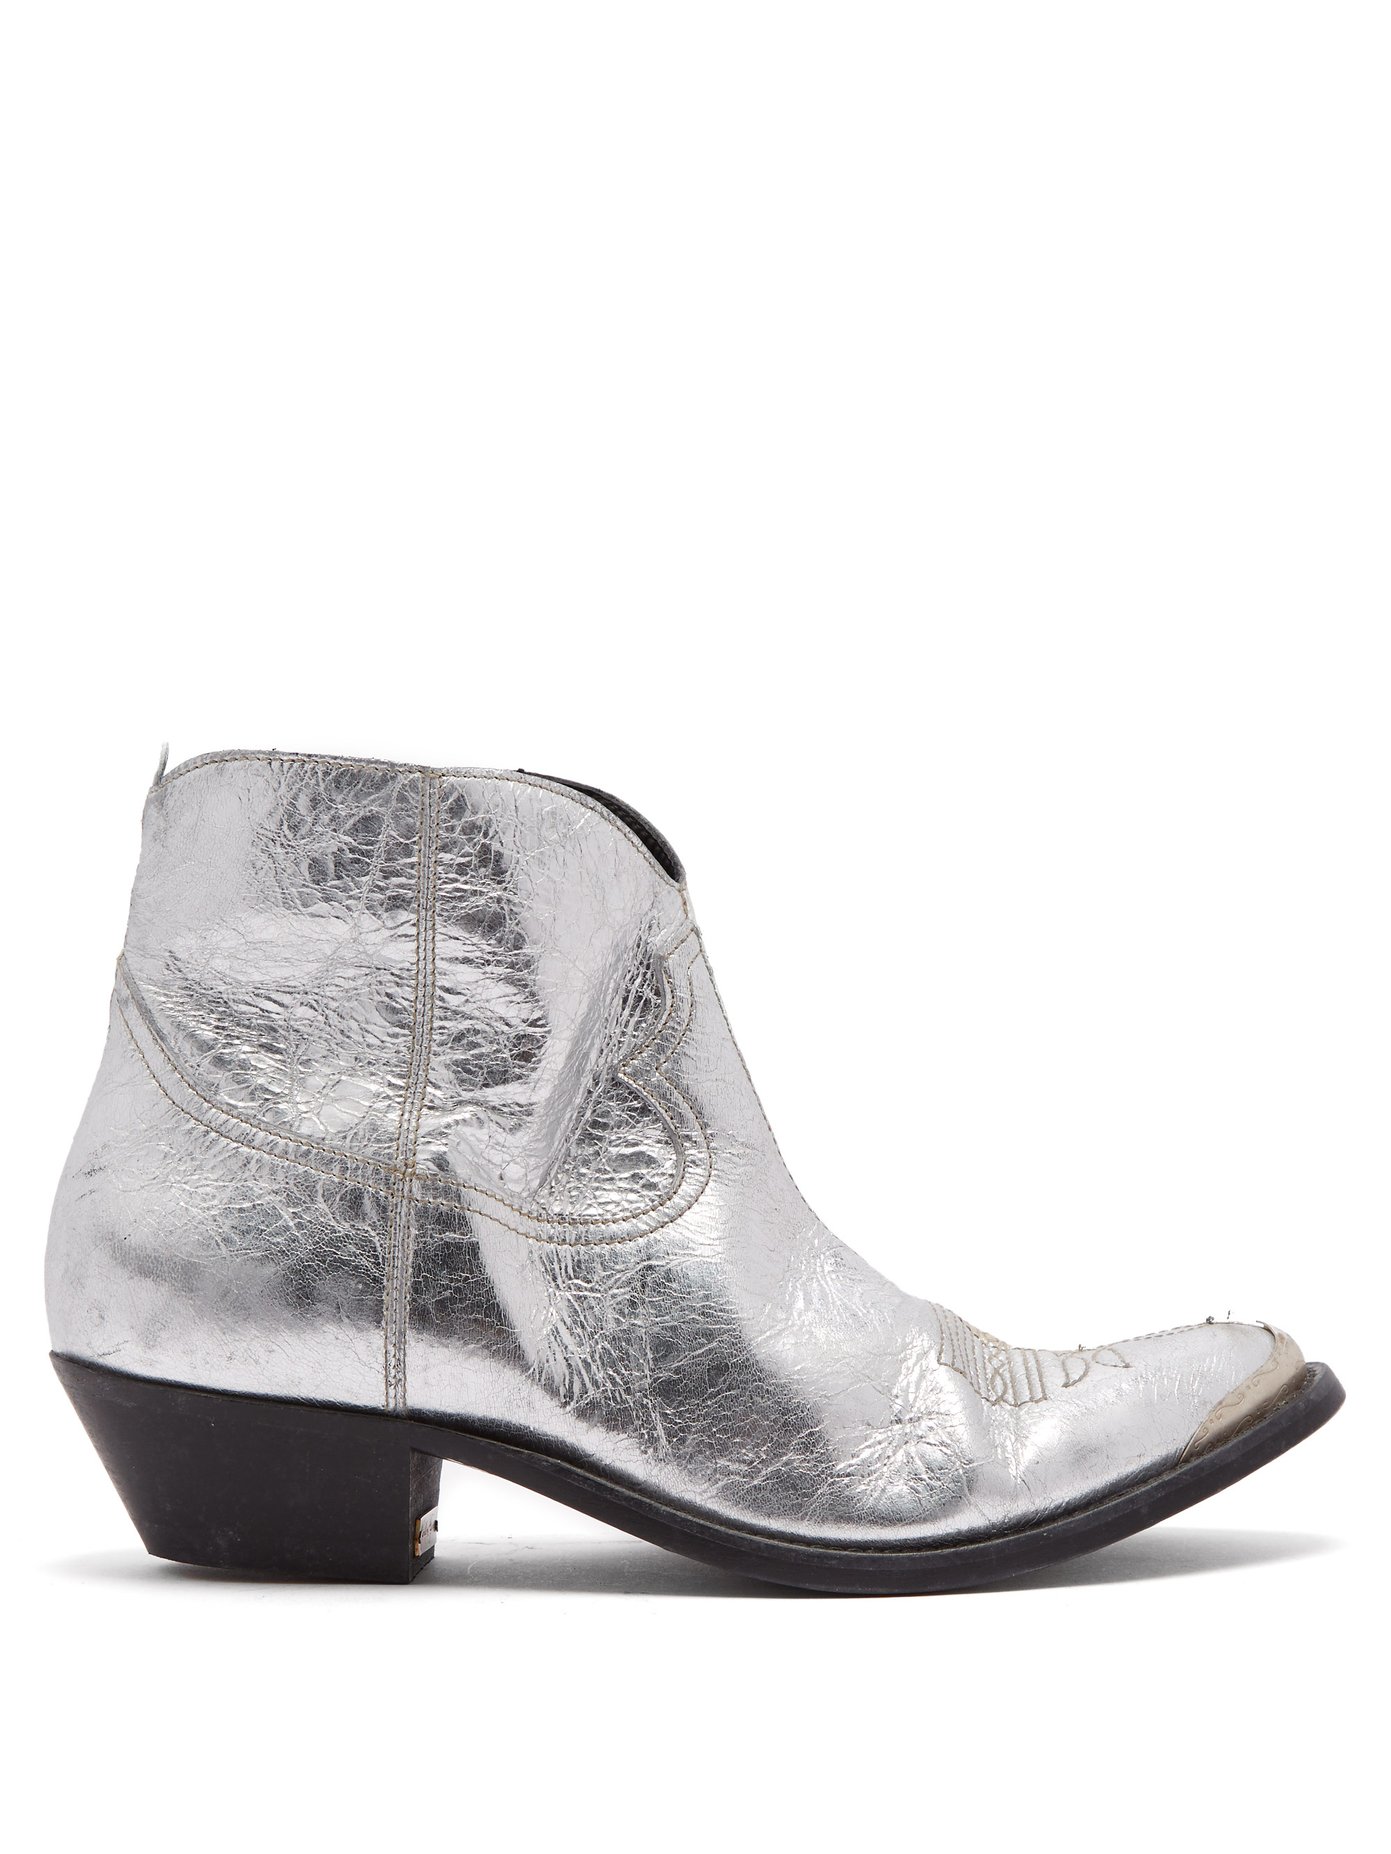 silver ankle boots uk